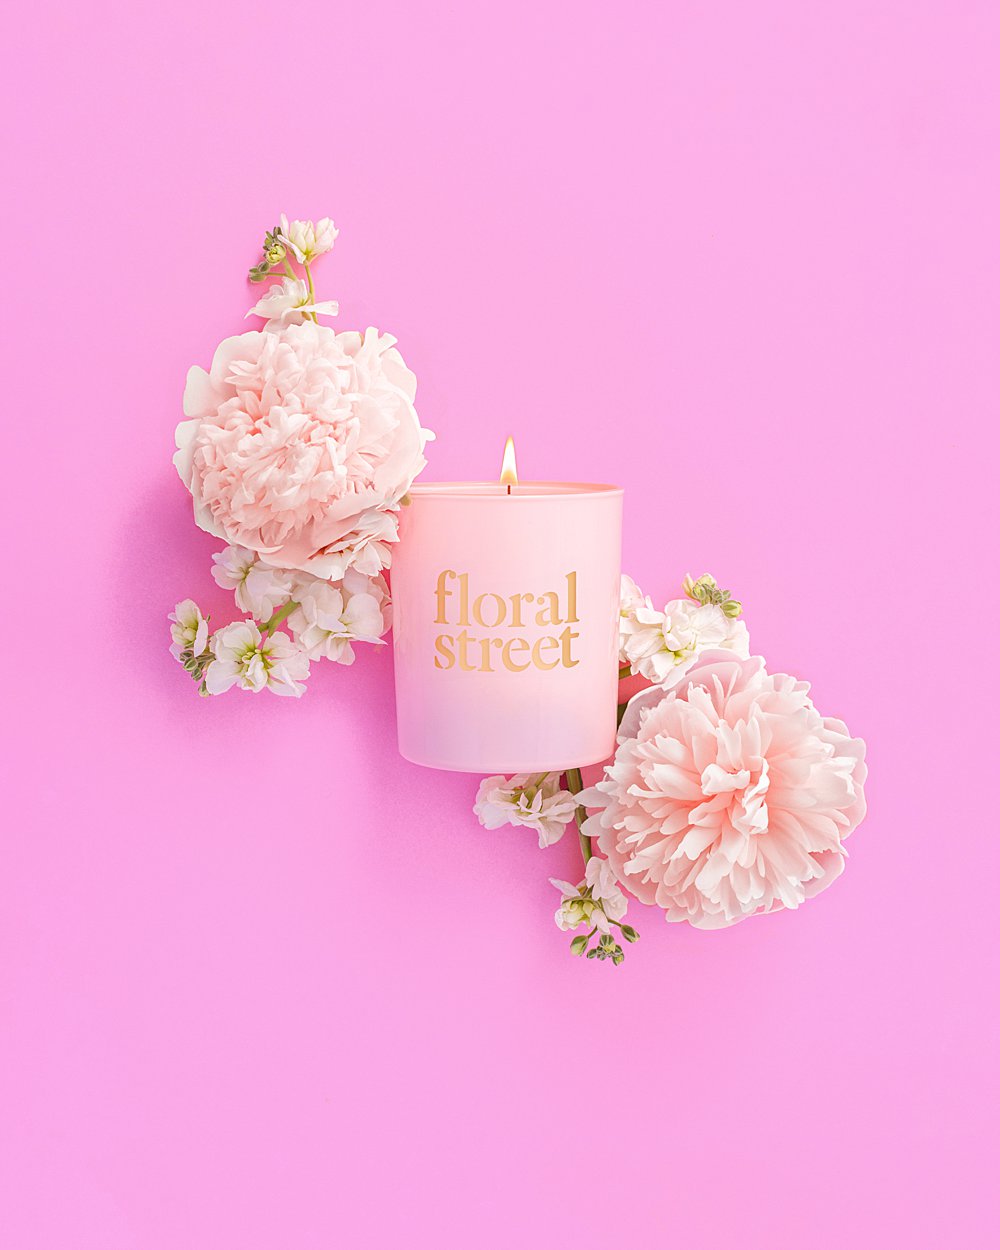 Colourful product photography with Floral Street Wonderland Peony. Styled still life photography with flowers by HIYA MARIANNE.